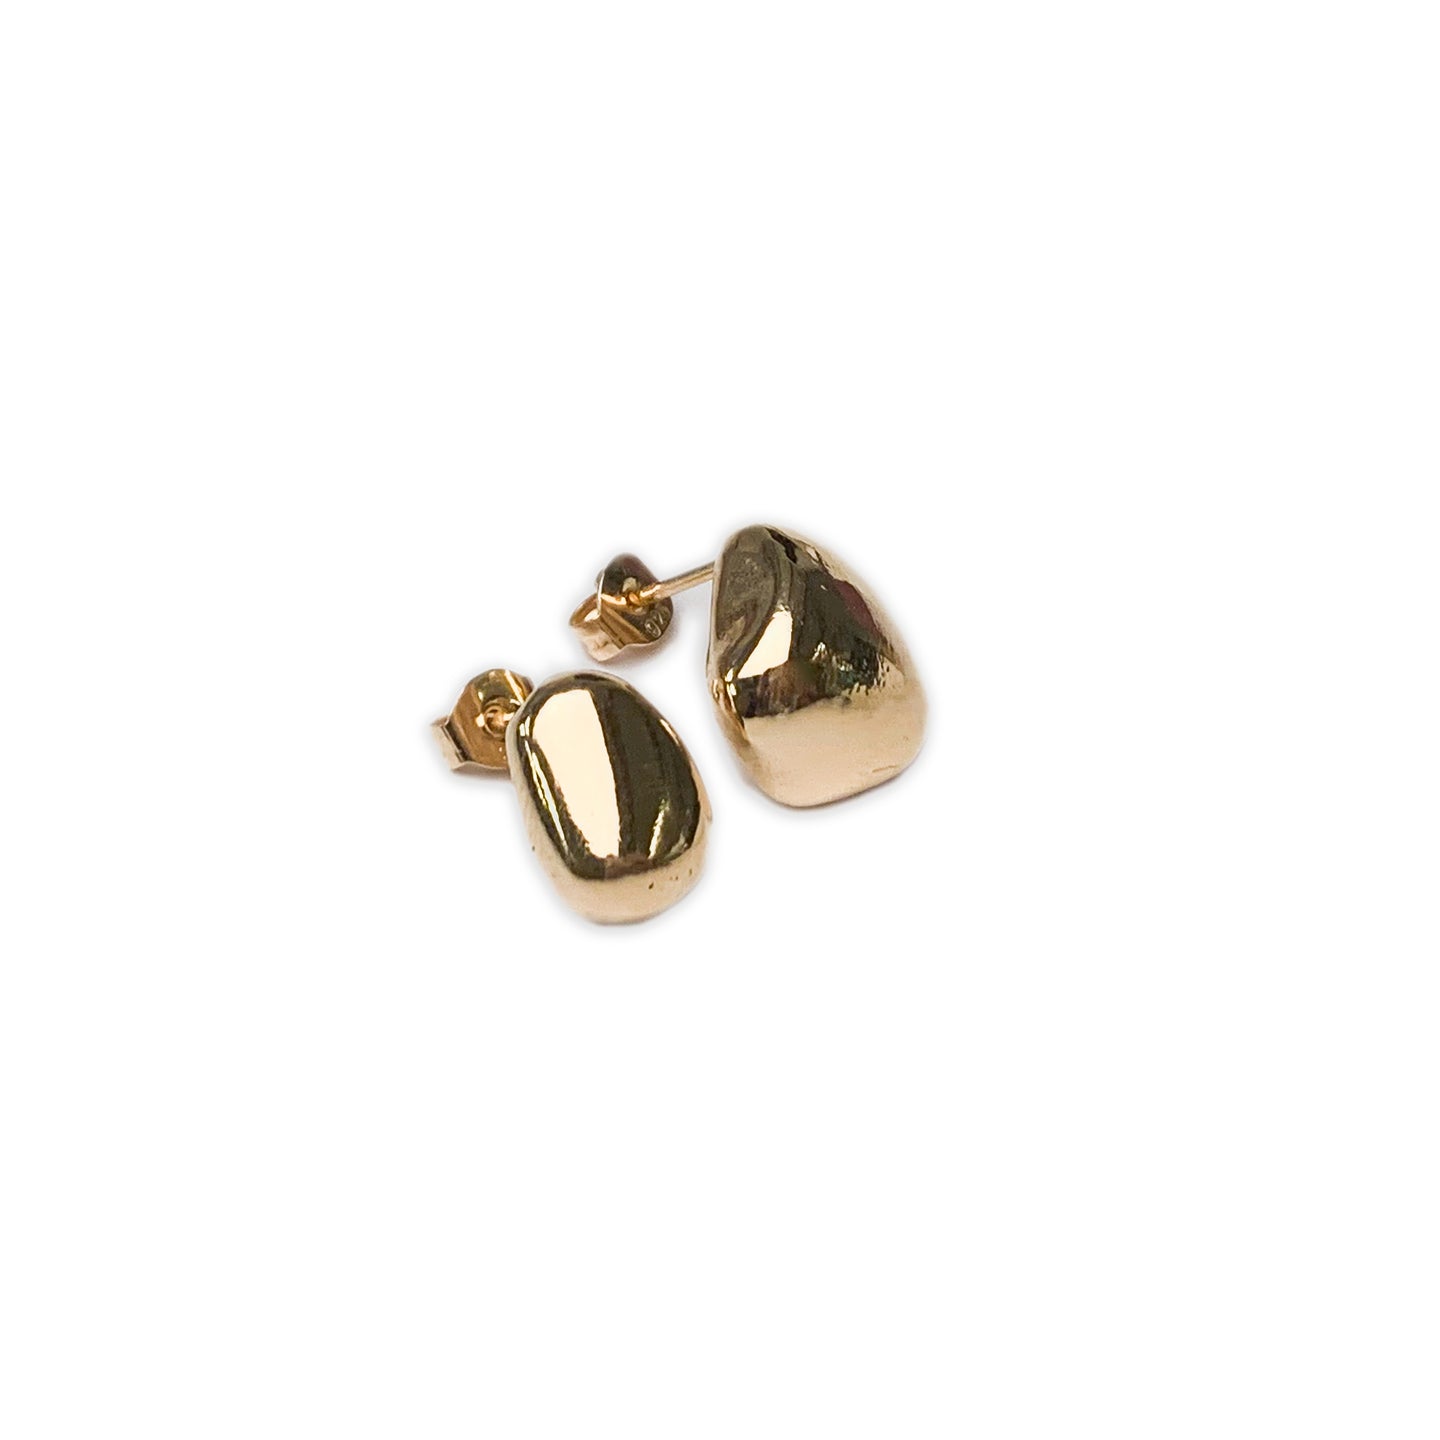 Martine Viergever - Earring - Rolling stones - gold